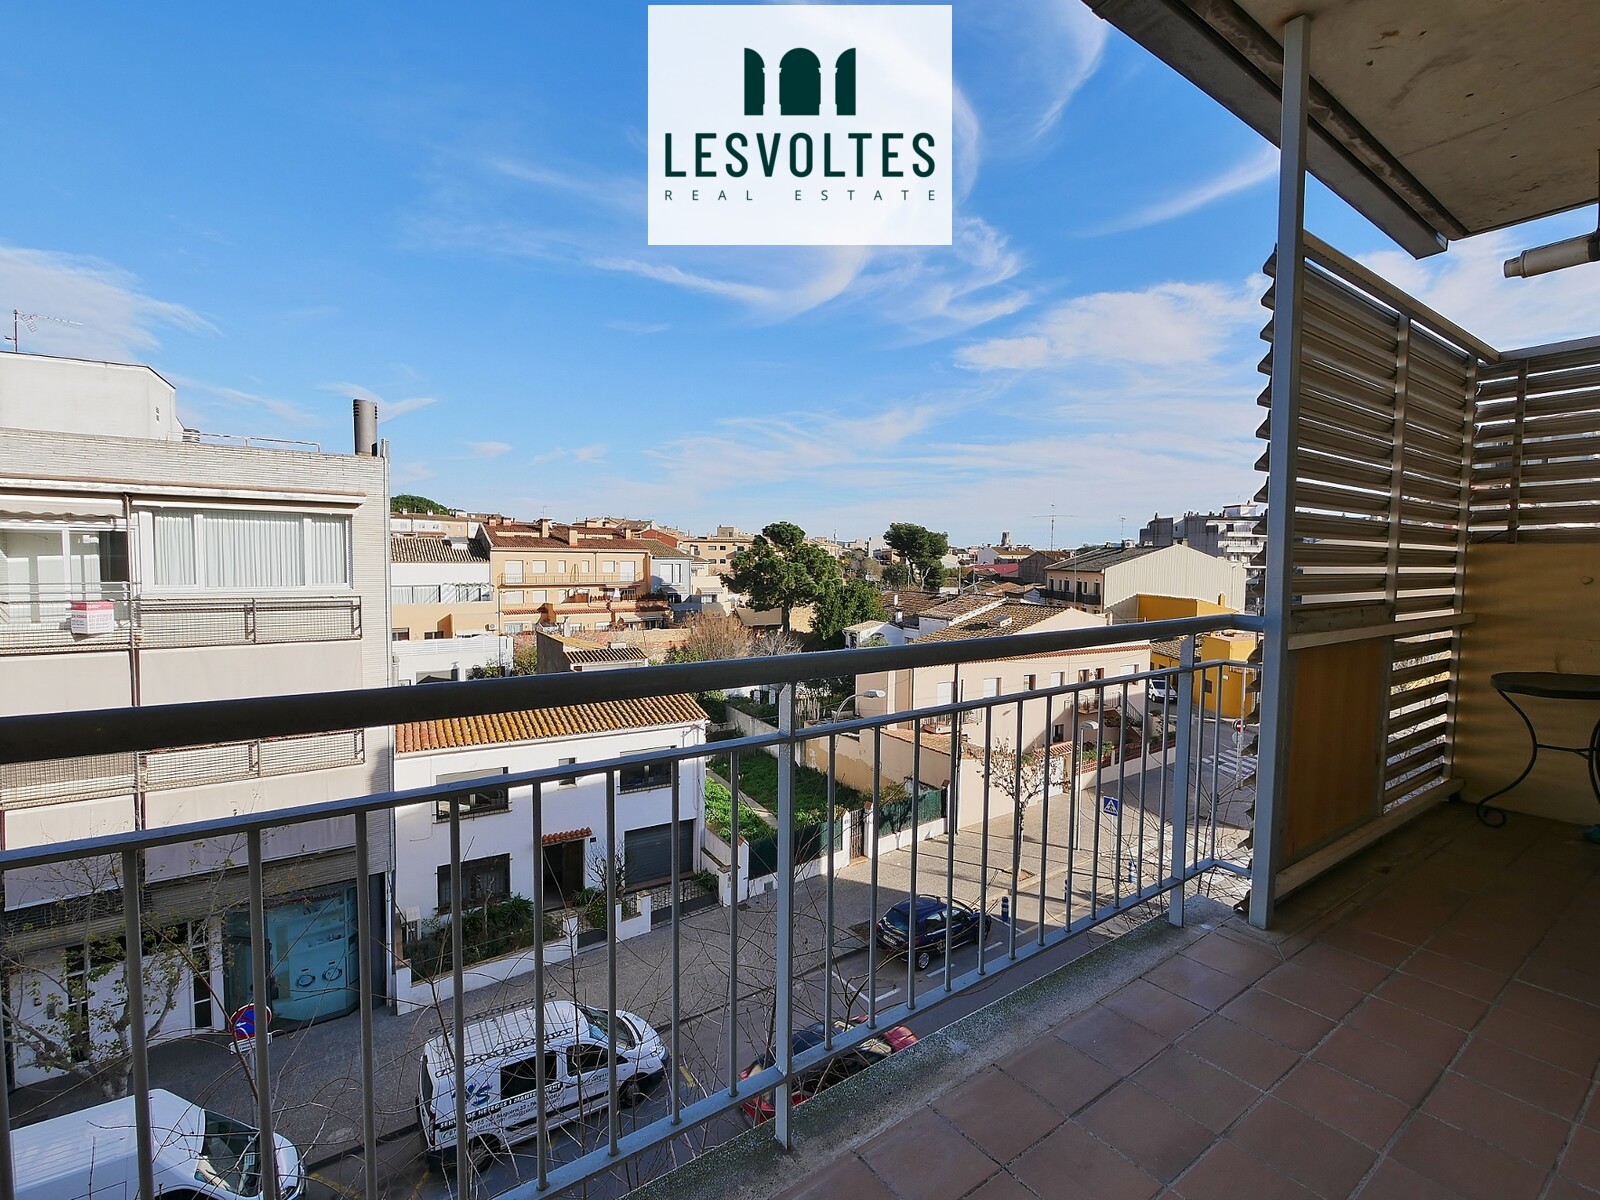 APARTMENT 100m2 WITH GOOD DISTRIBUTION AND CLEAR VIEWS FOR SALE IN PALAFRUGELL.